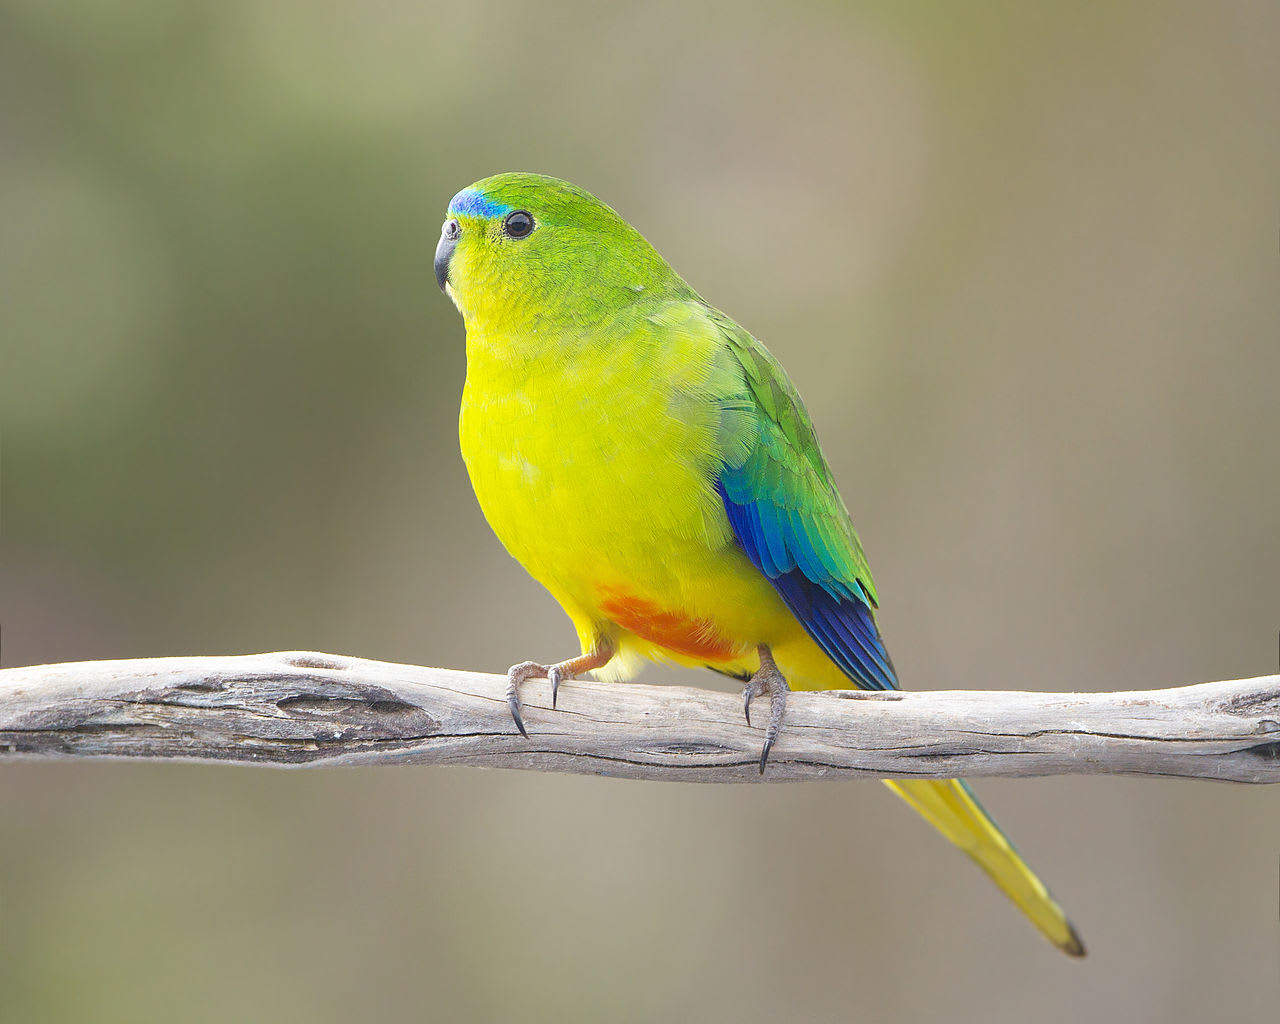 Meet the Orange-bellied Parrot! It’s an endangered bird that can be spotted in Tasmania & Australia. It prefers salt marsh habitats, where it forages for plants & seeds. Males tend to be brighter in color, with more distinct patches of orange & yellow. : JJ Harrison